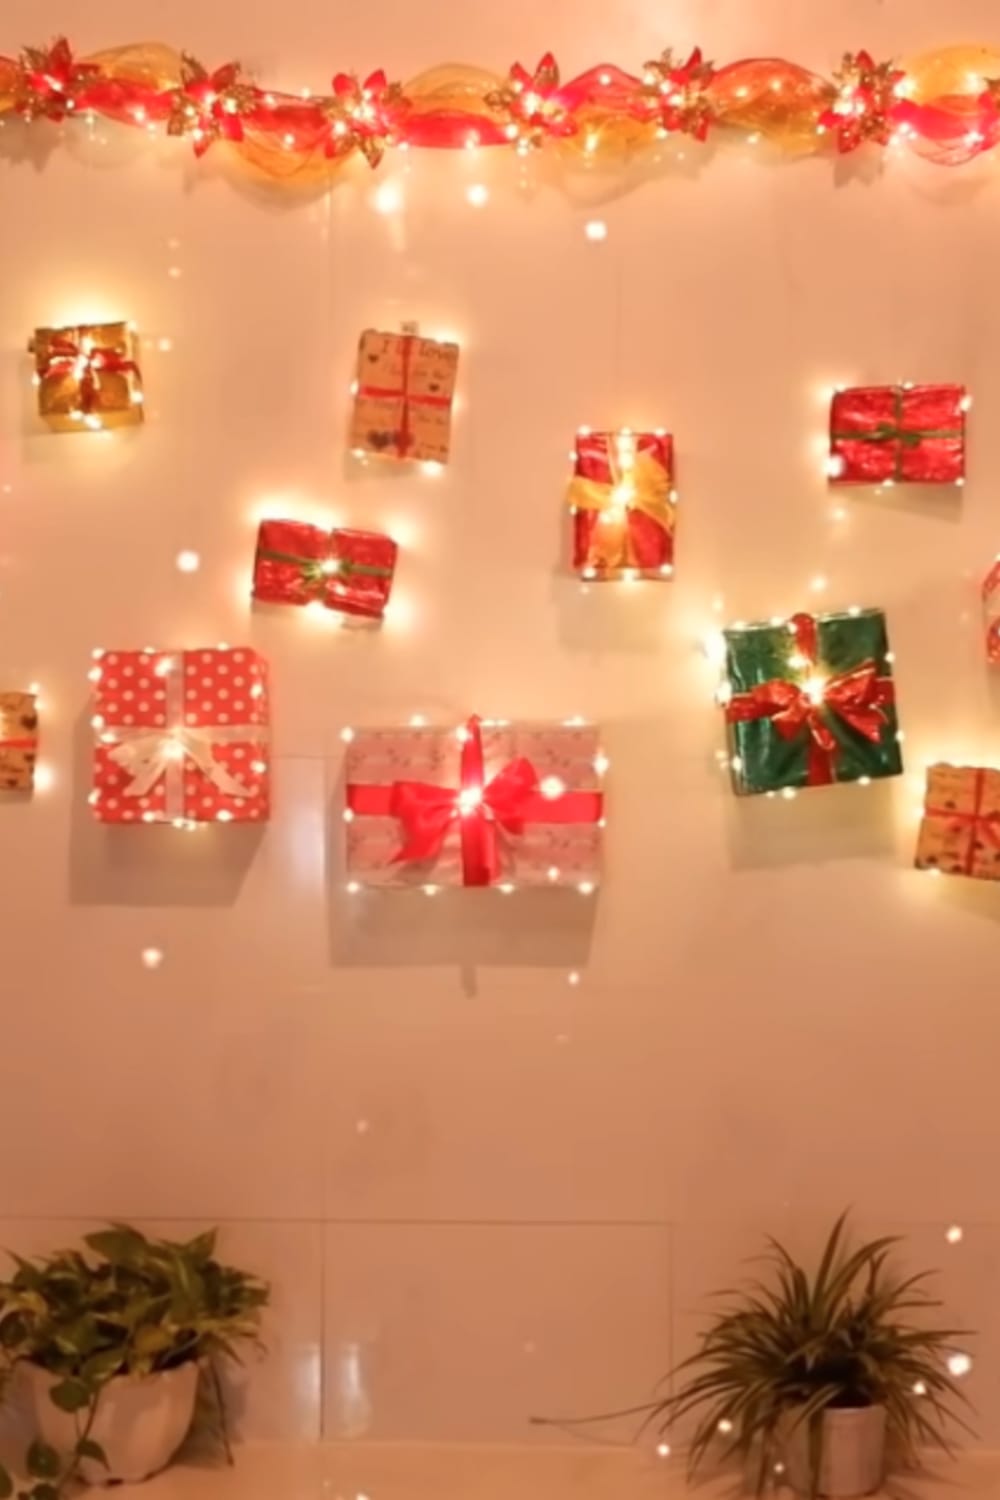 Christmas crafts for adults-simple Christmas craft ideas for adults to make - like this DIY wall decoration with twinkle lights and wrapped gifts - so cute!